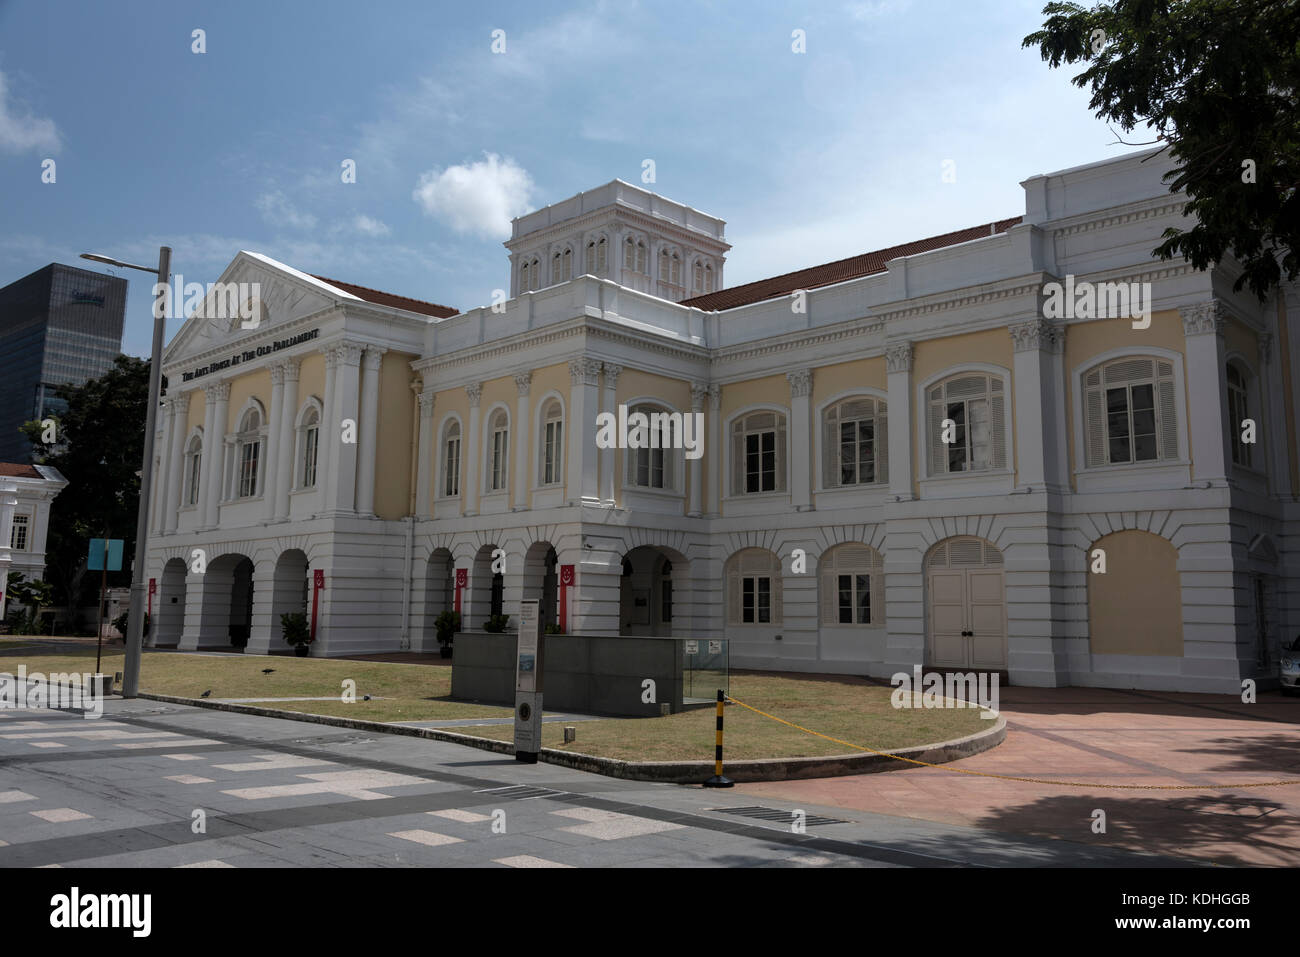 The colonial styled building (1827) of the old Singapore parliament in Singapore.  It is the oldest surviving public building in Singapore. It is now Stock Photo